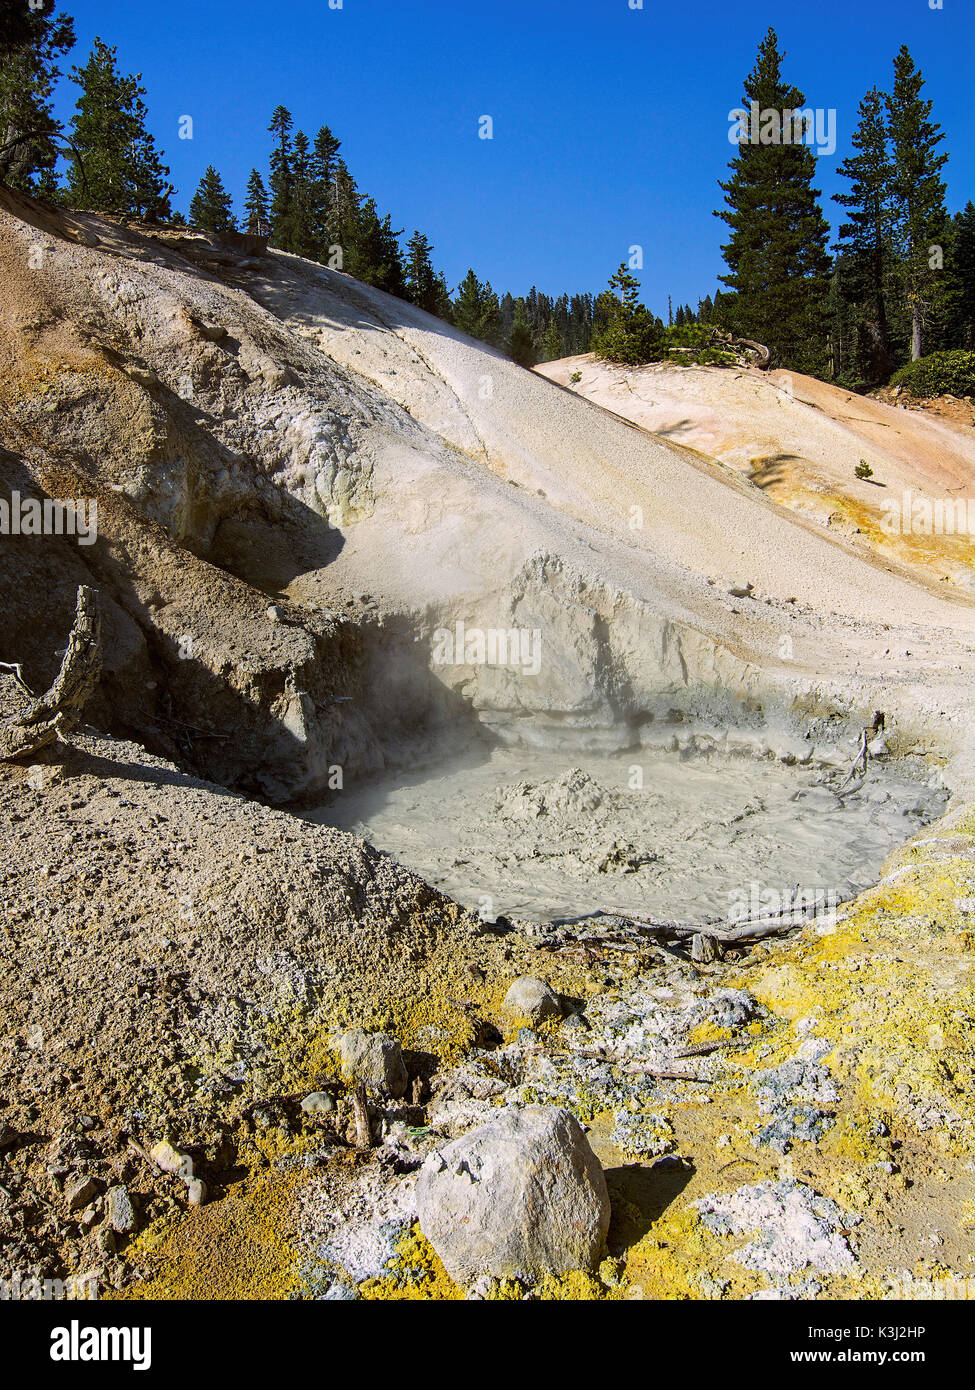 Sulphur works boiling mudpot, Lassen Volcanic National Park. This is one of the hydrothermal tourist spots in the park, along the main park road, easy Stock Photo